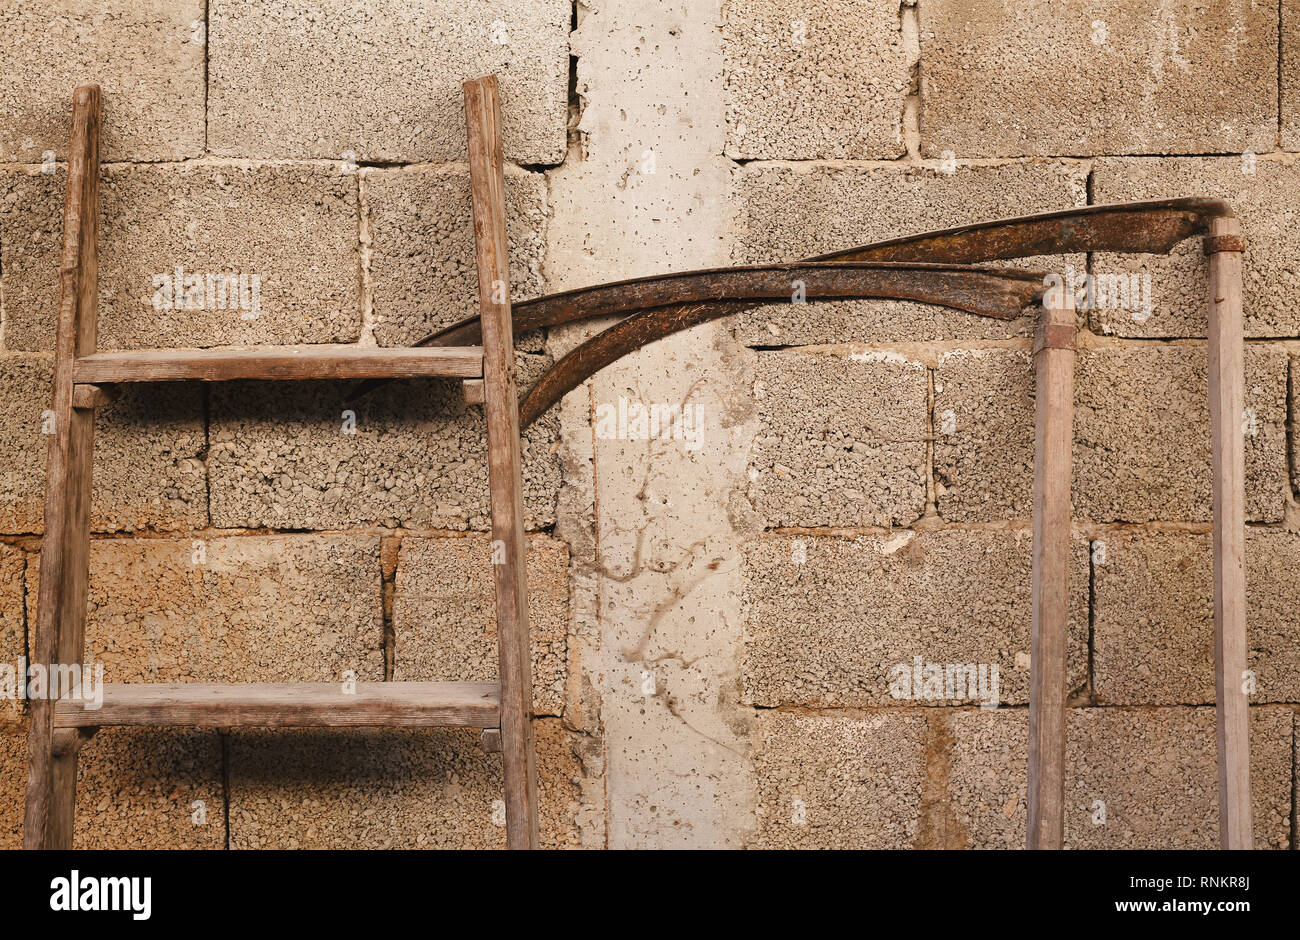 Country life, old croppers and wooden ladder in front of an old brick wall. Stock Photo